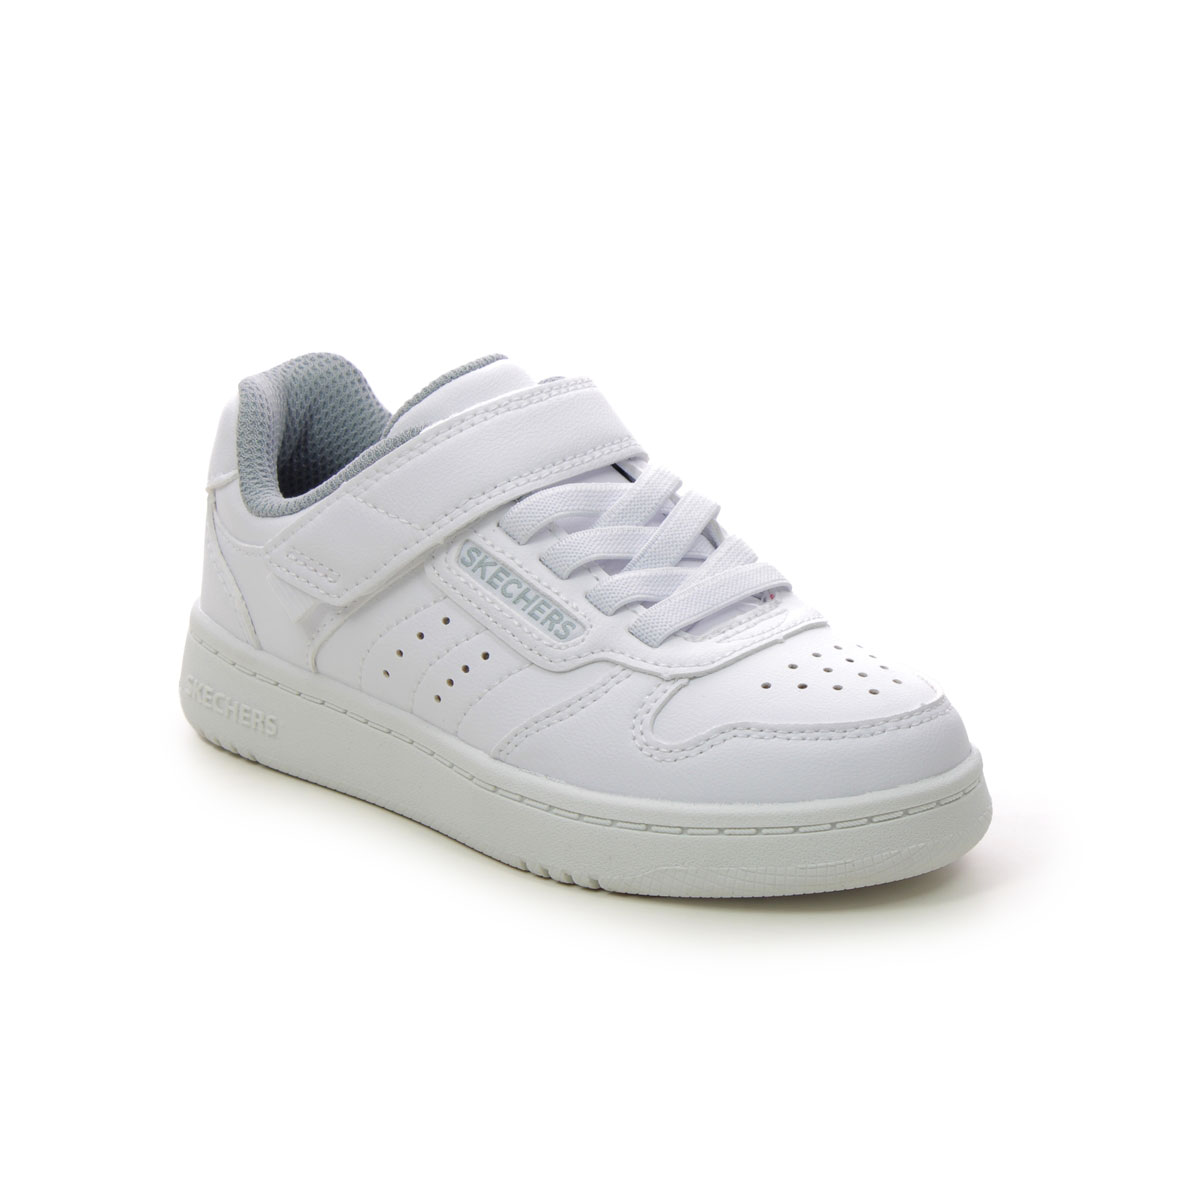 Skechers Quick Street Bungee WHT White Kids trainers 405638L in a Plain Man-made in Size 35